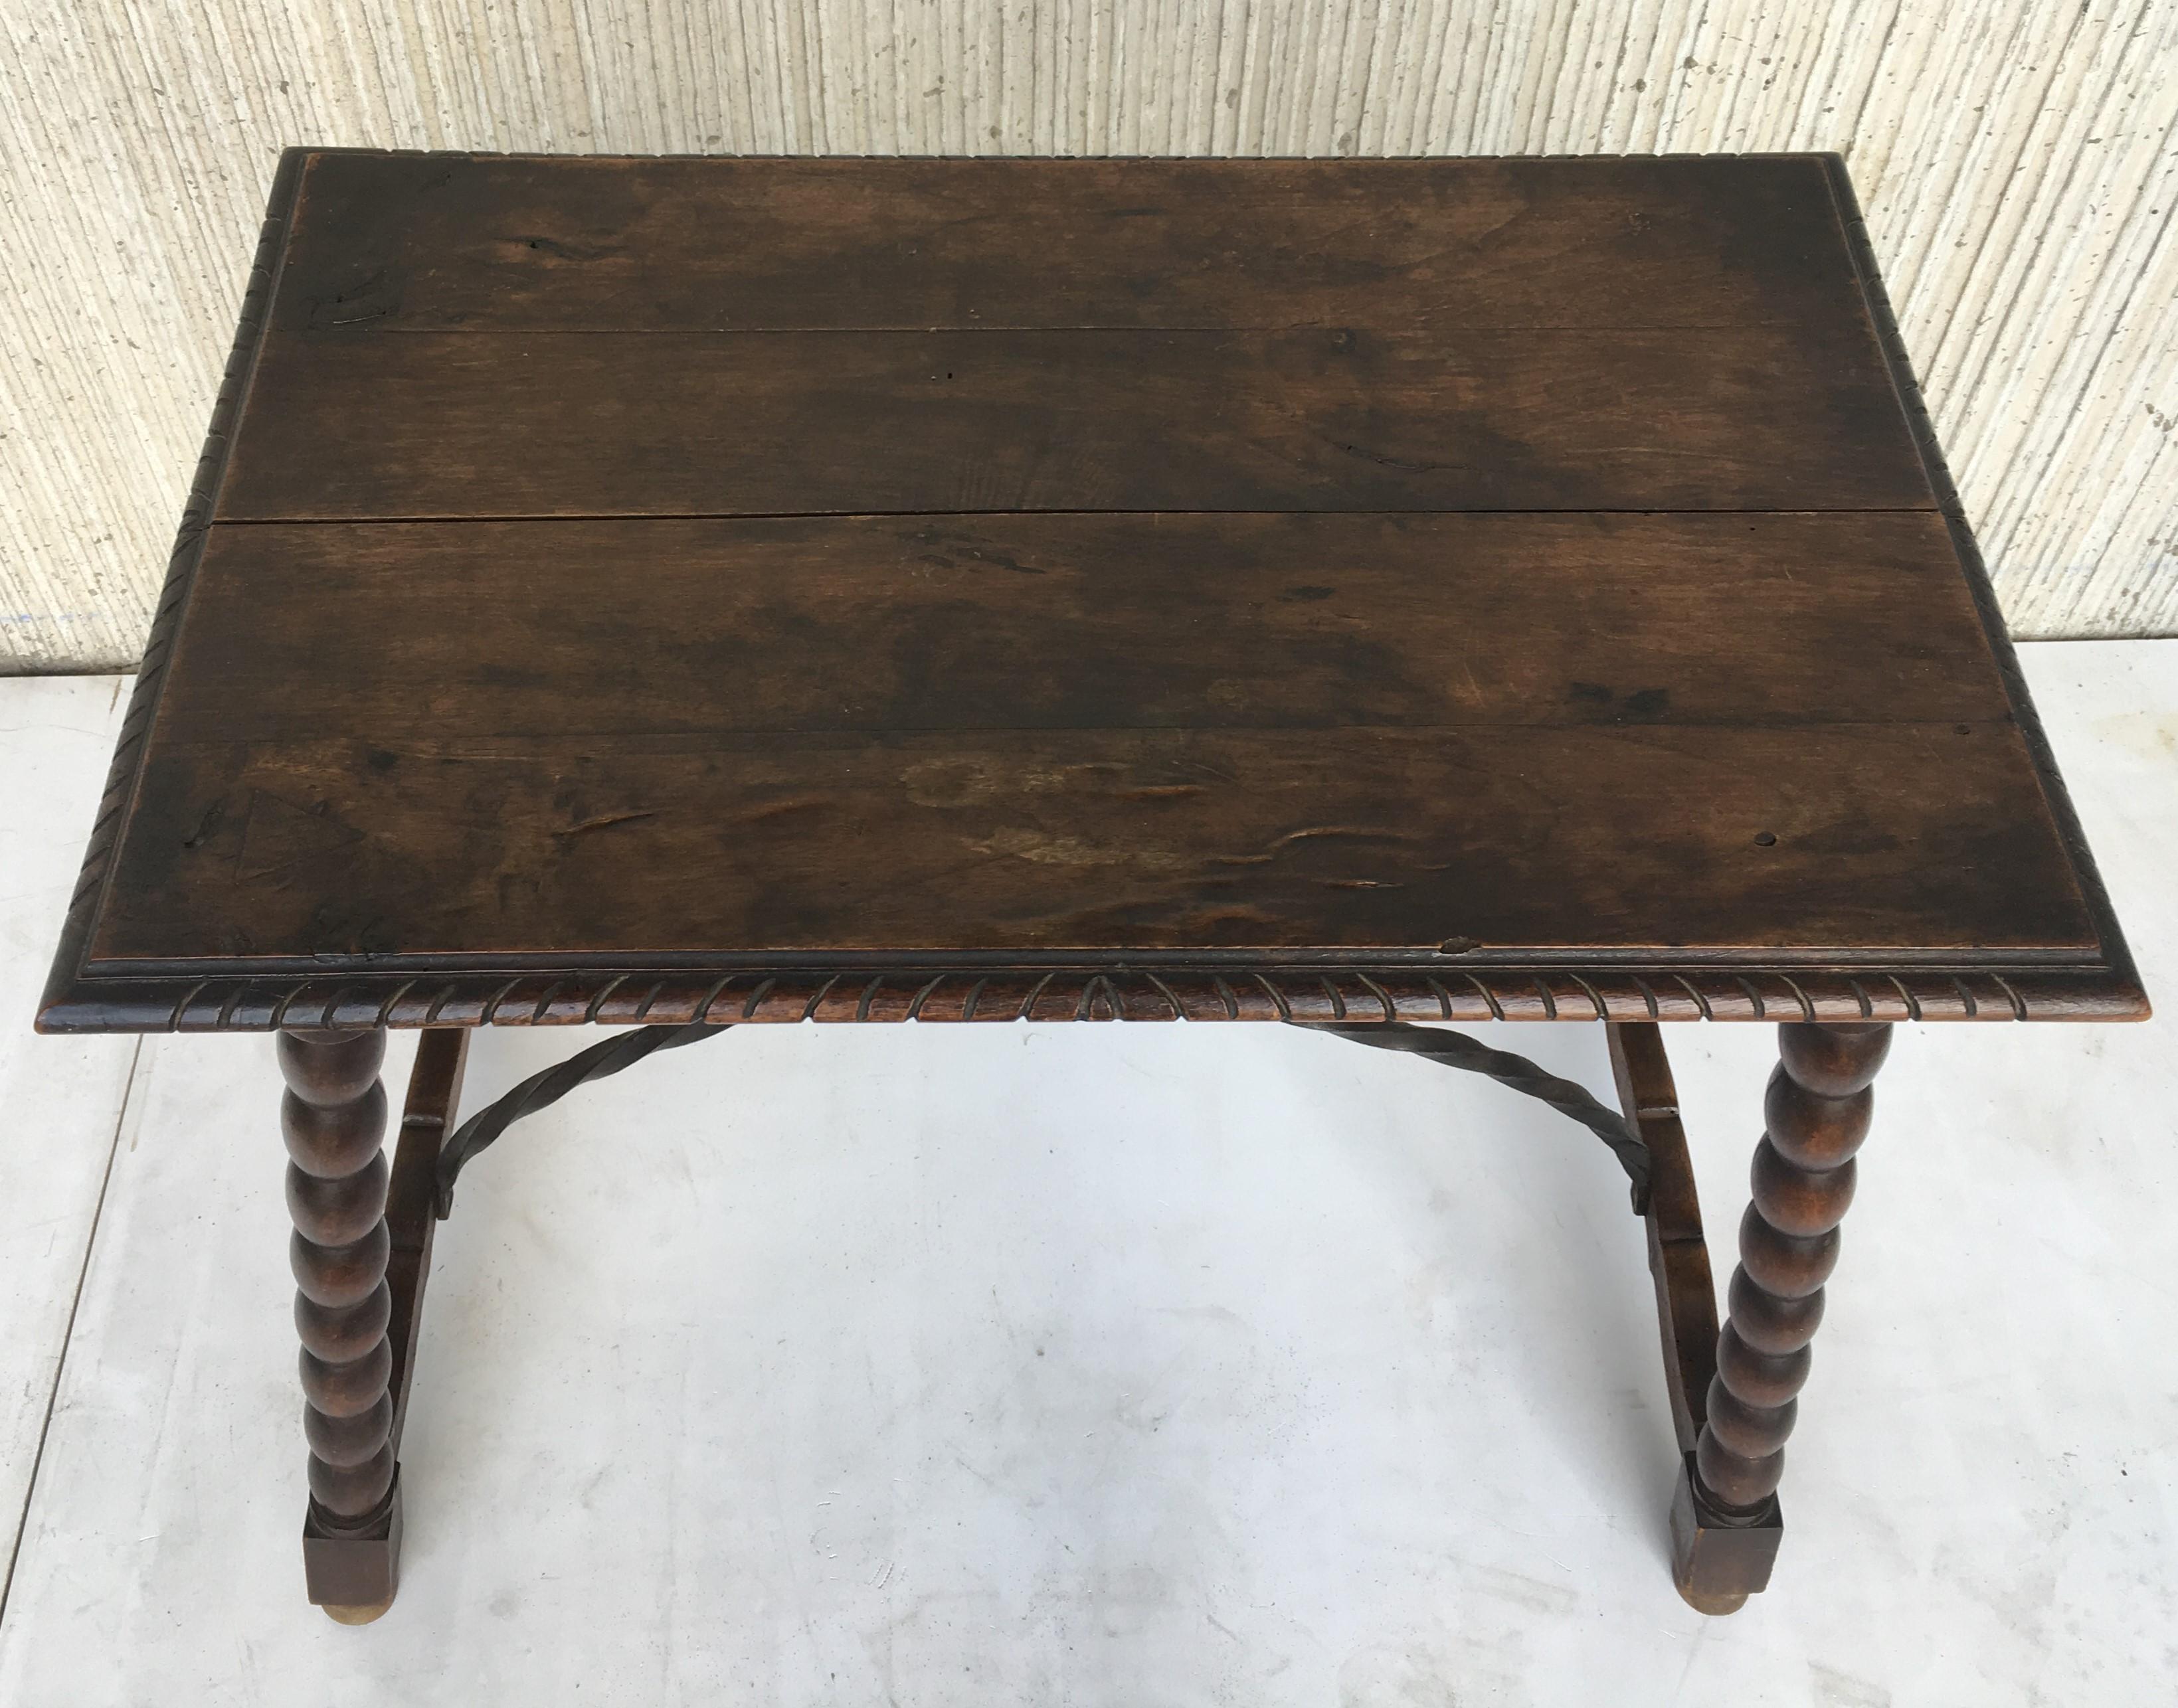 Spanish Baroque Side Table with Iron Stretcher and Carved Top in Walnut im Zustand „Gut“ in Miami, FL